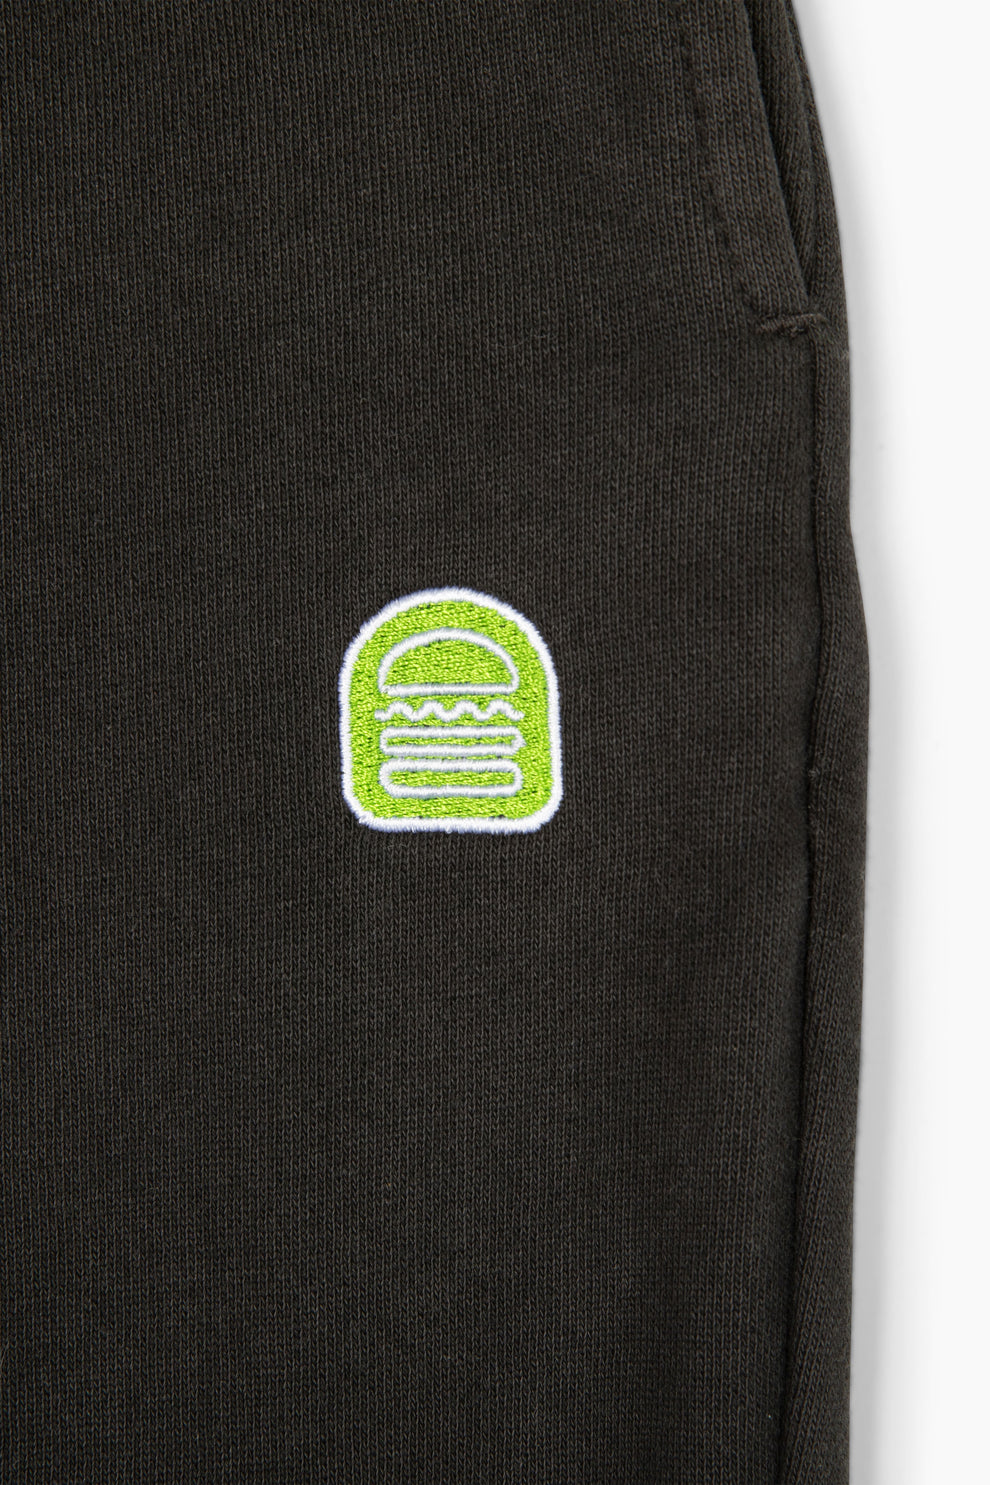 Closeup of the embroidered Shake Shack logo on the left pant leg